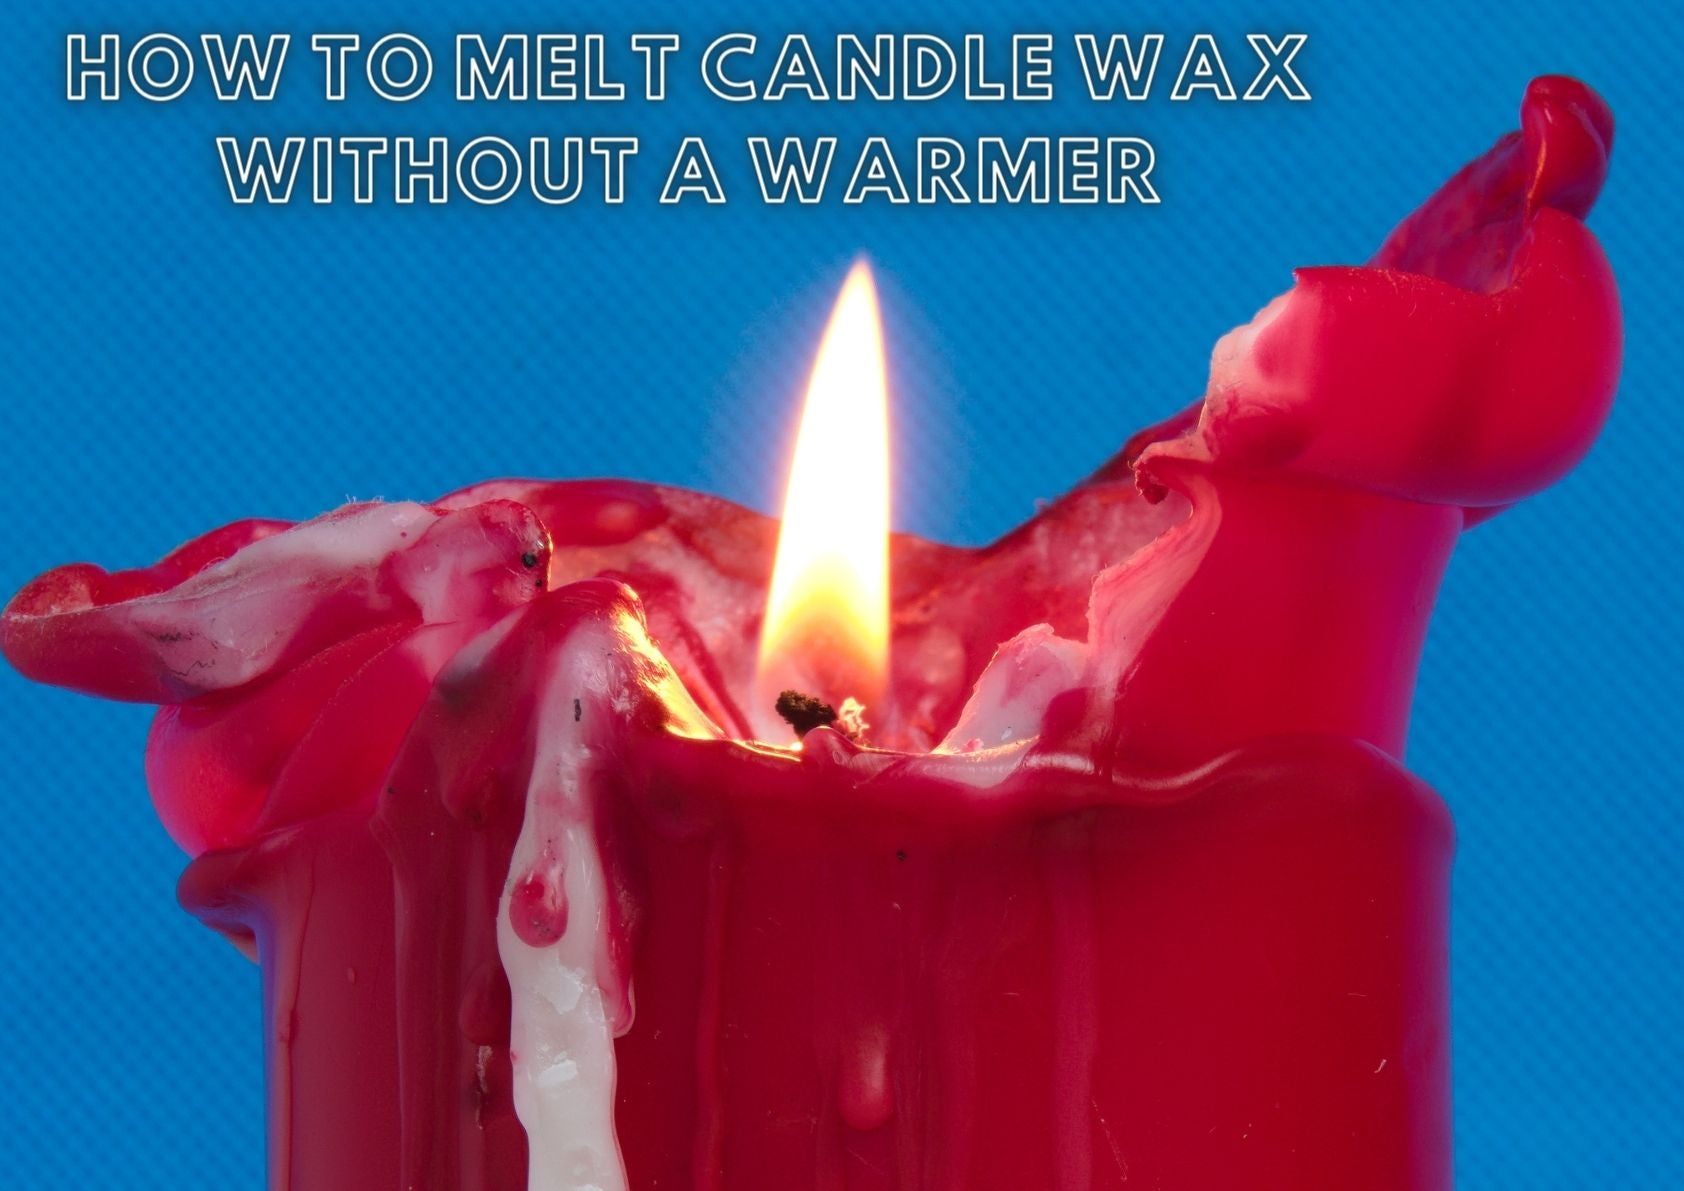 How to melt candle wax without a warmer